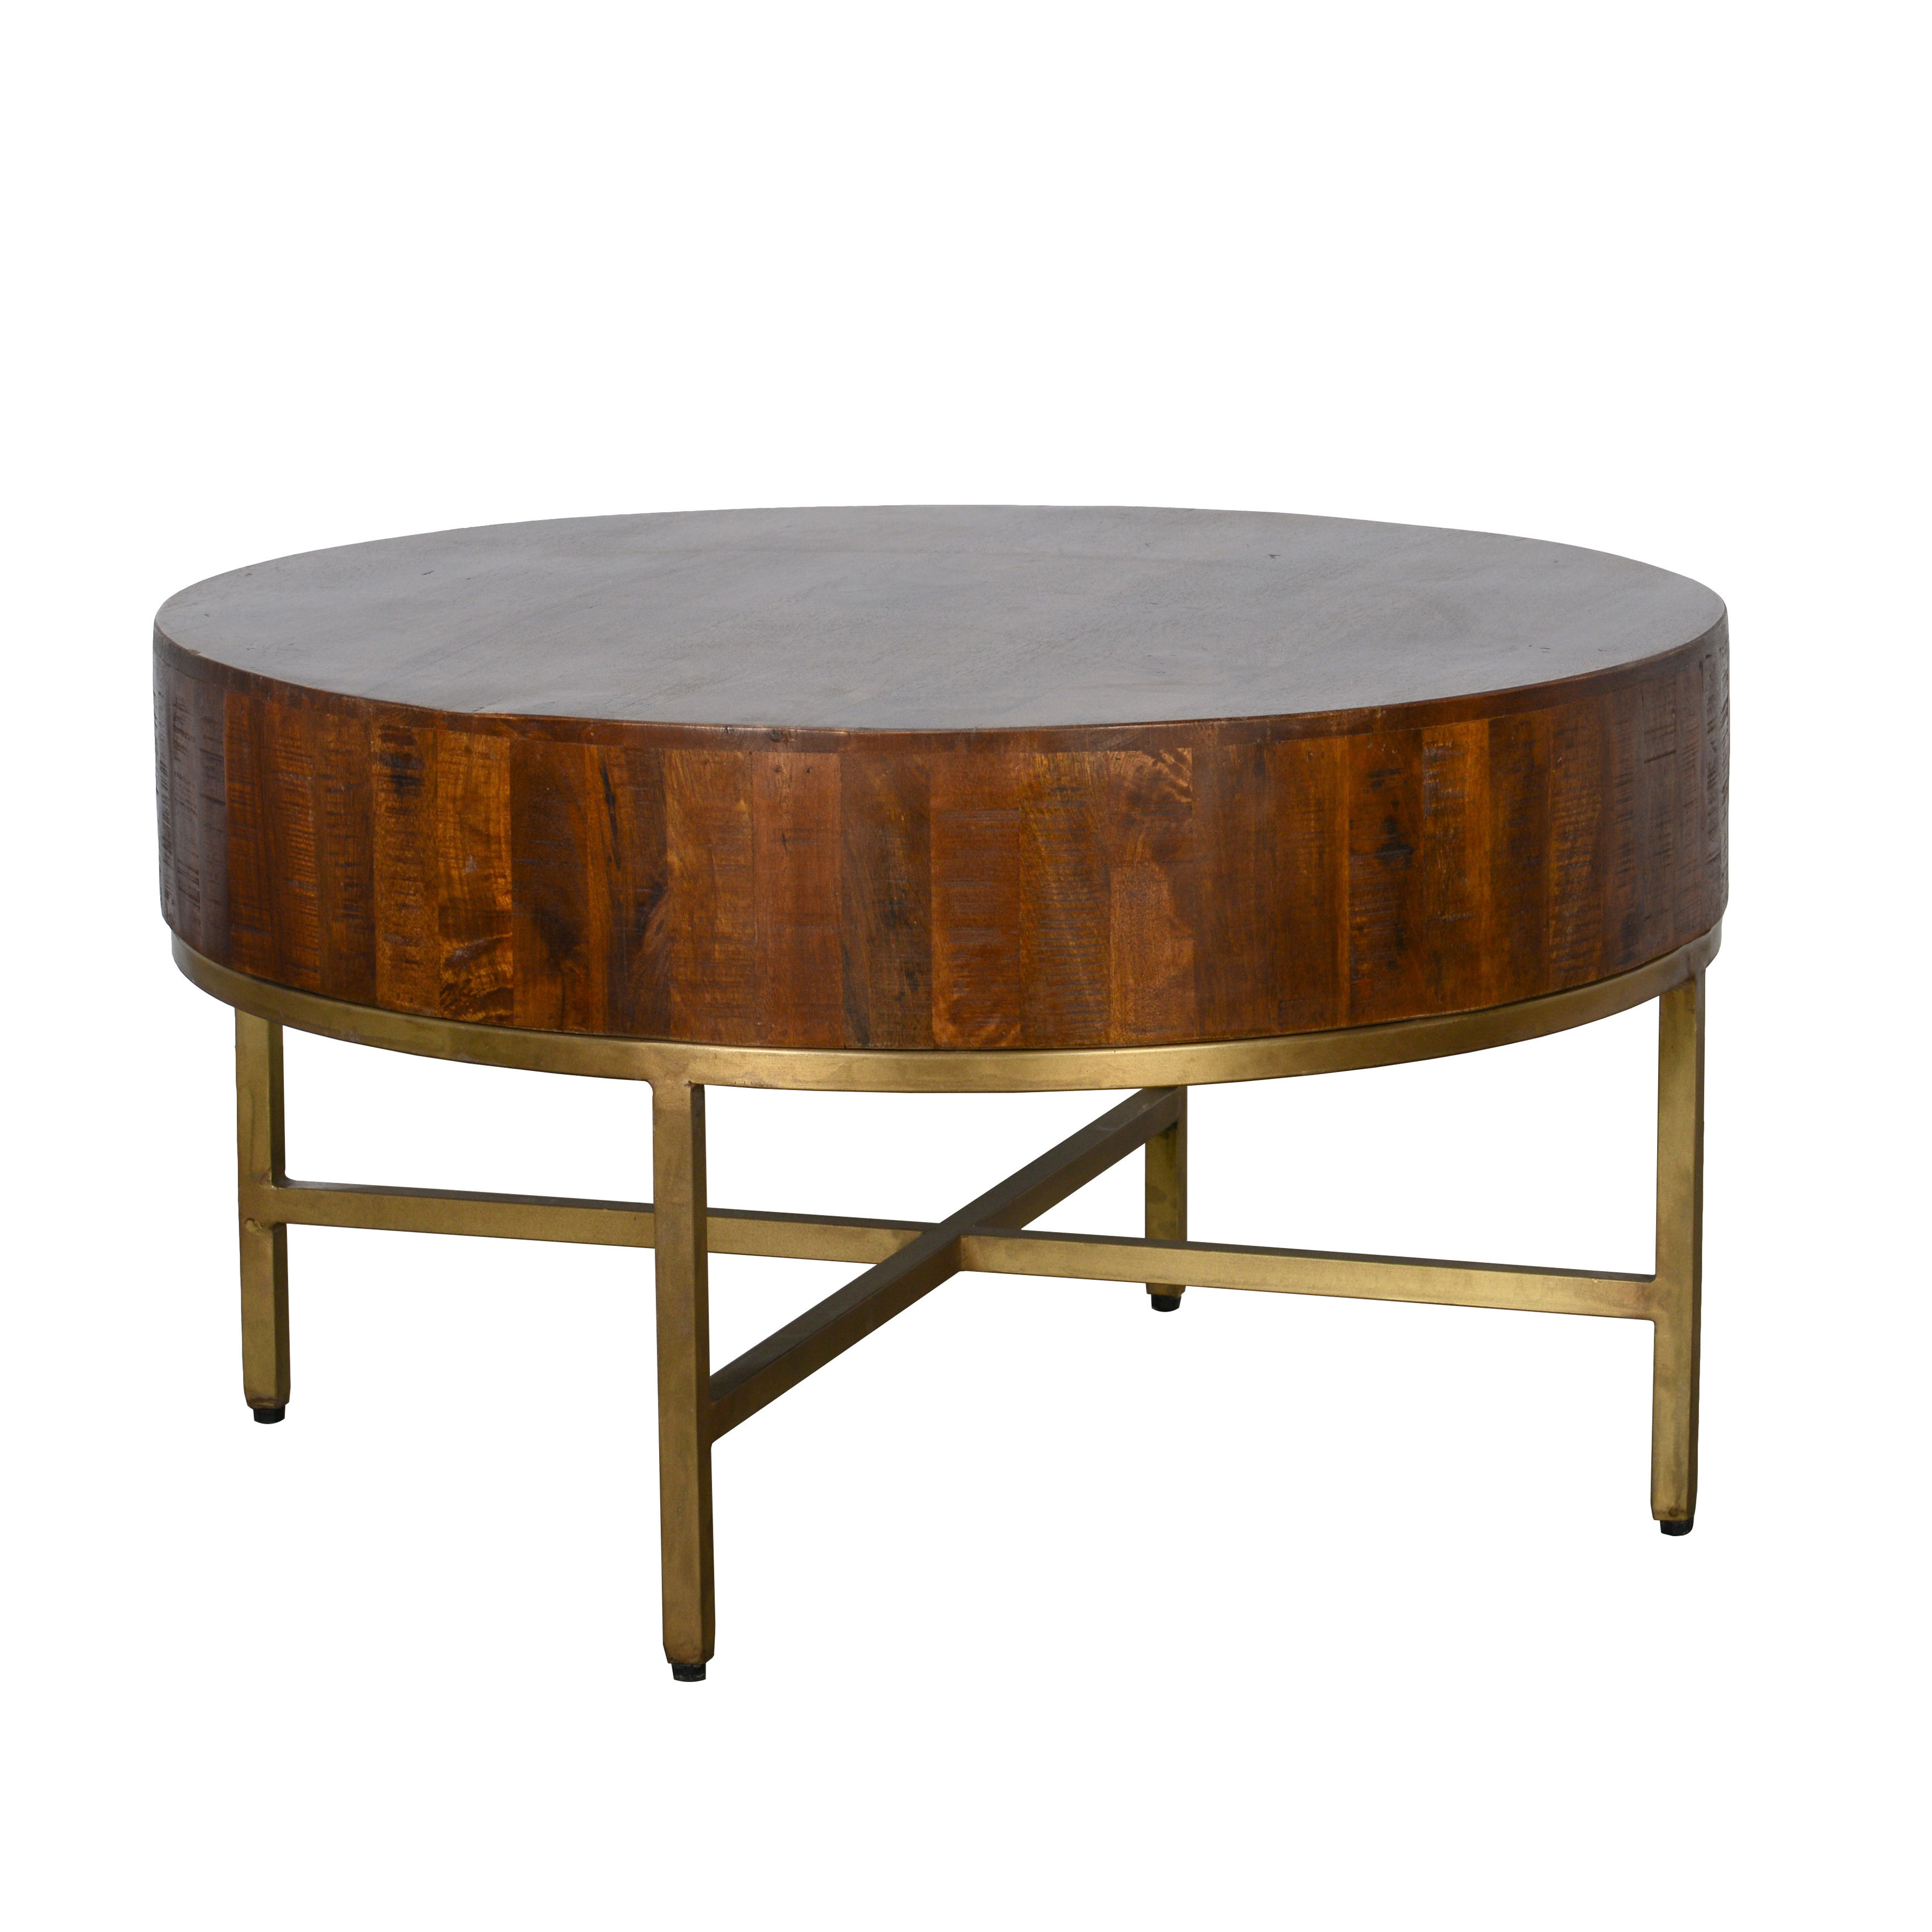 montreal inch round coffee table kosas home brown end tables cort office furniture threshold accent retro nest antique mirror rustic pallet rod iron and wood laura ashley cutlery